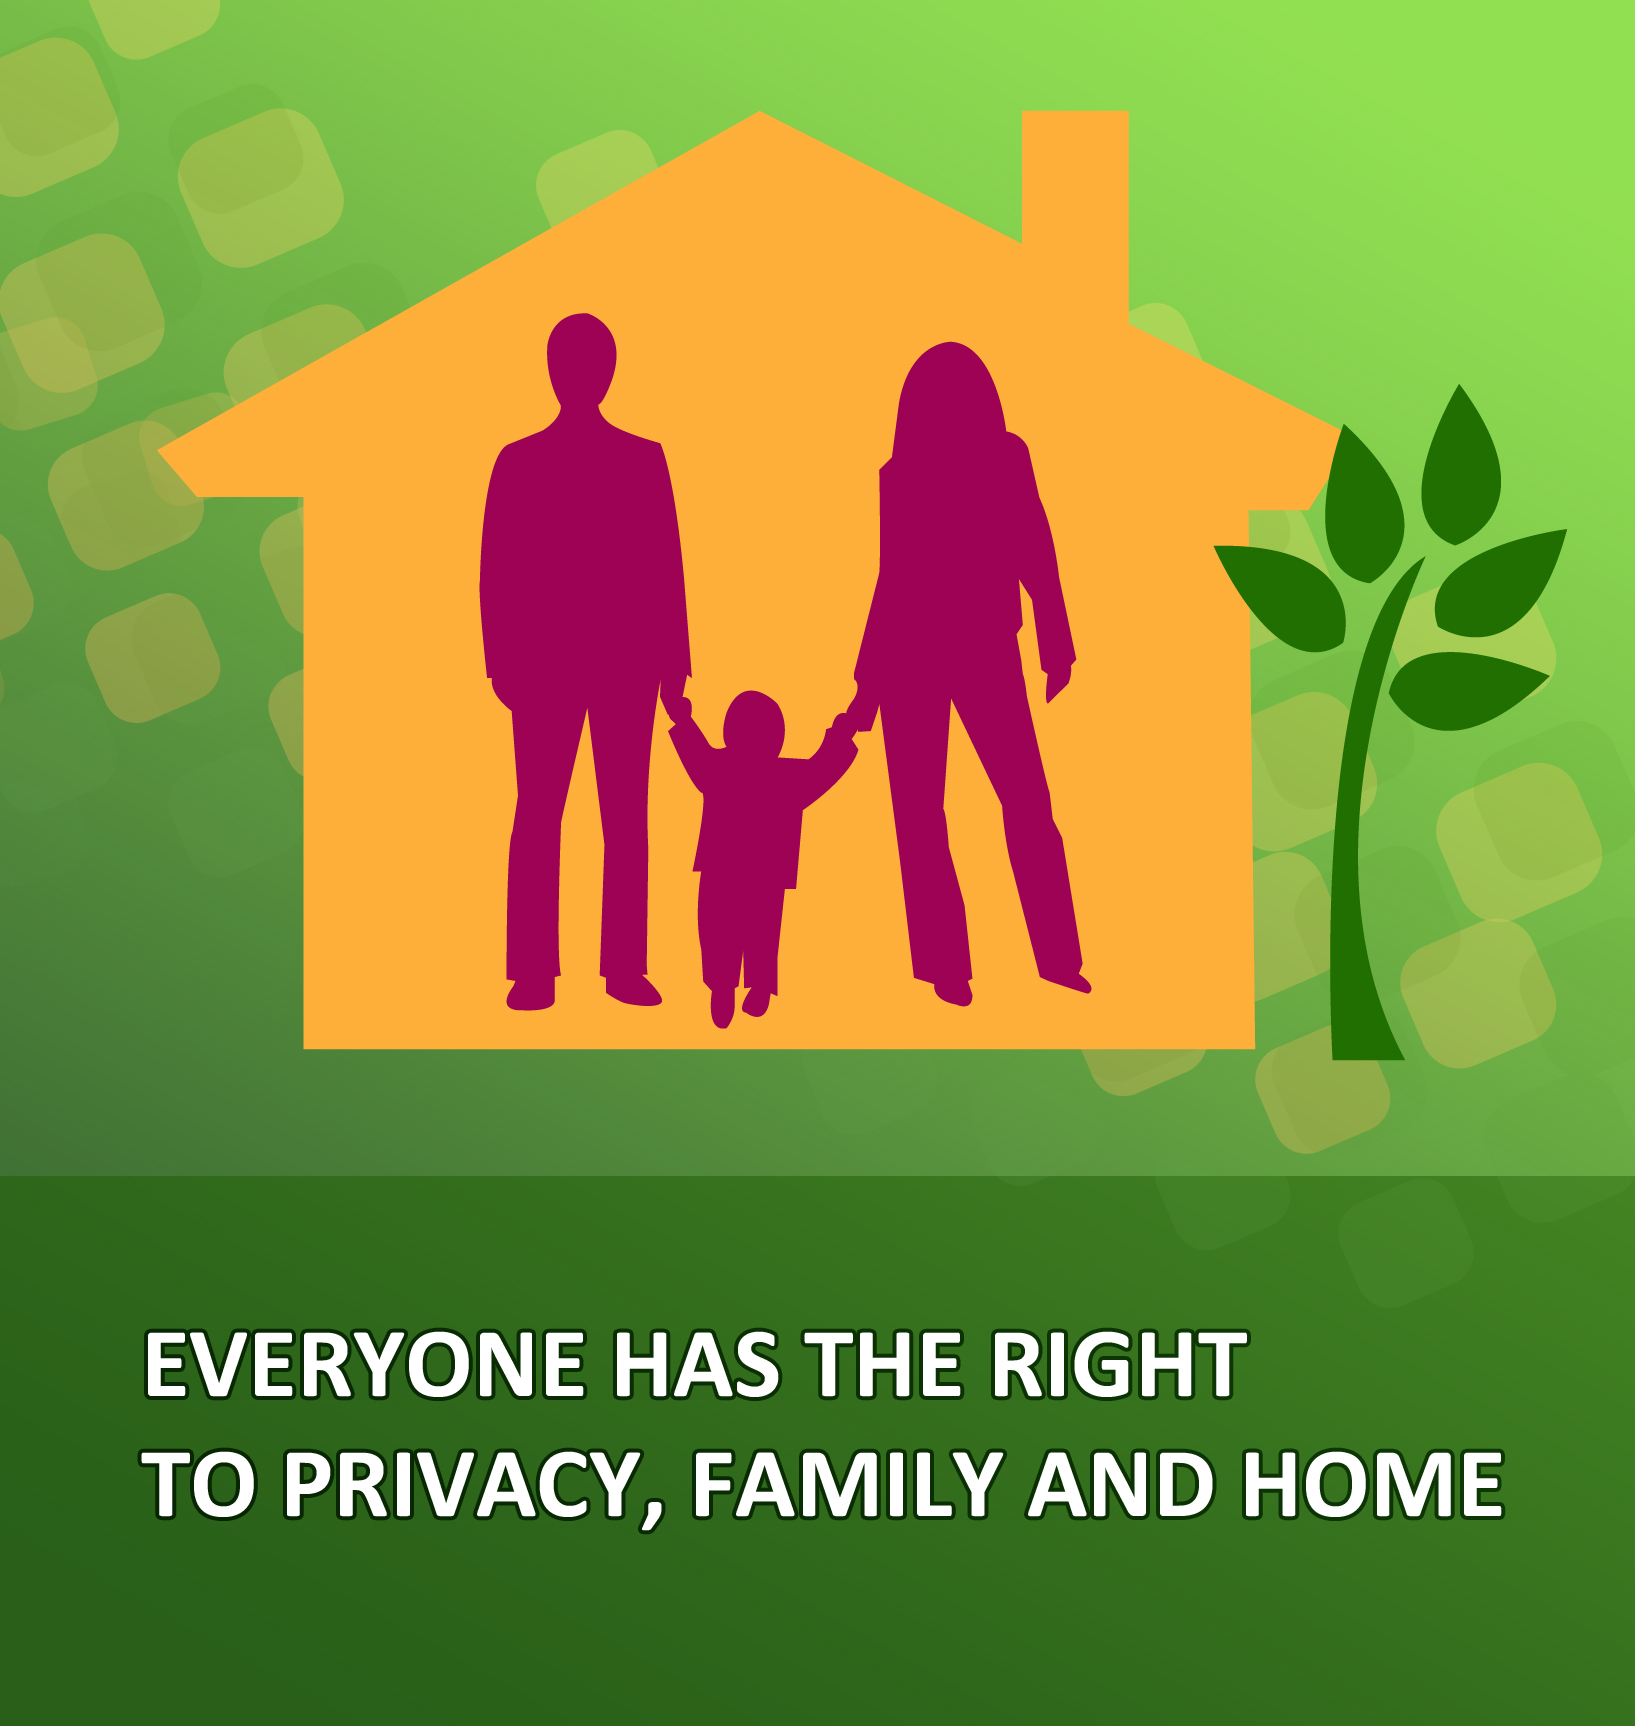 Right to privacy. Private family